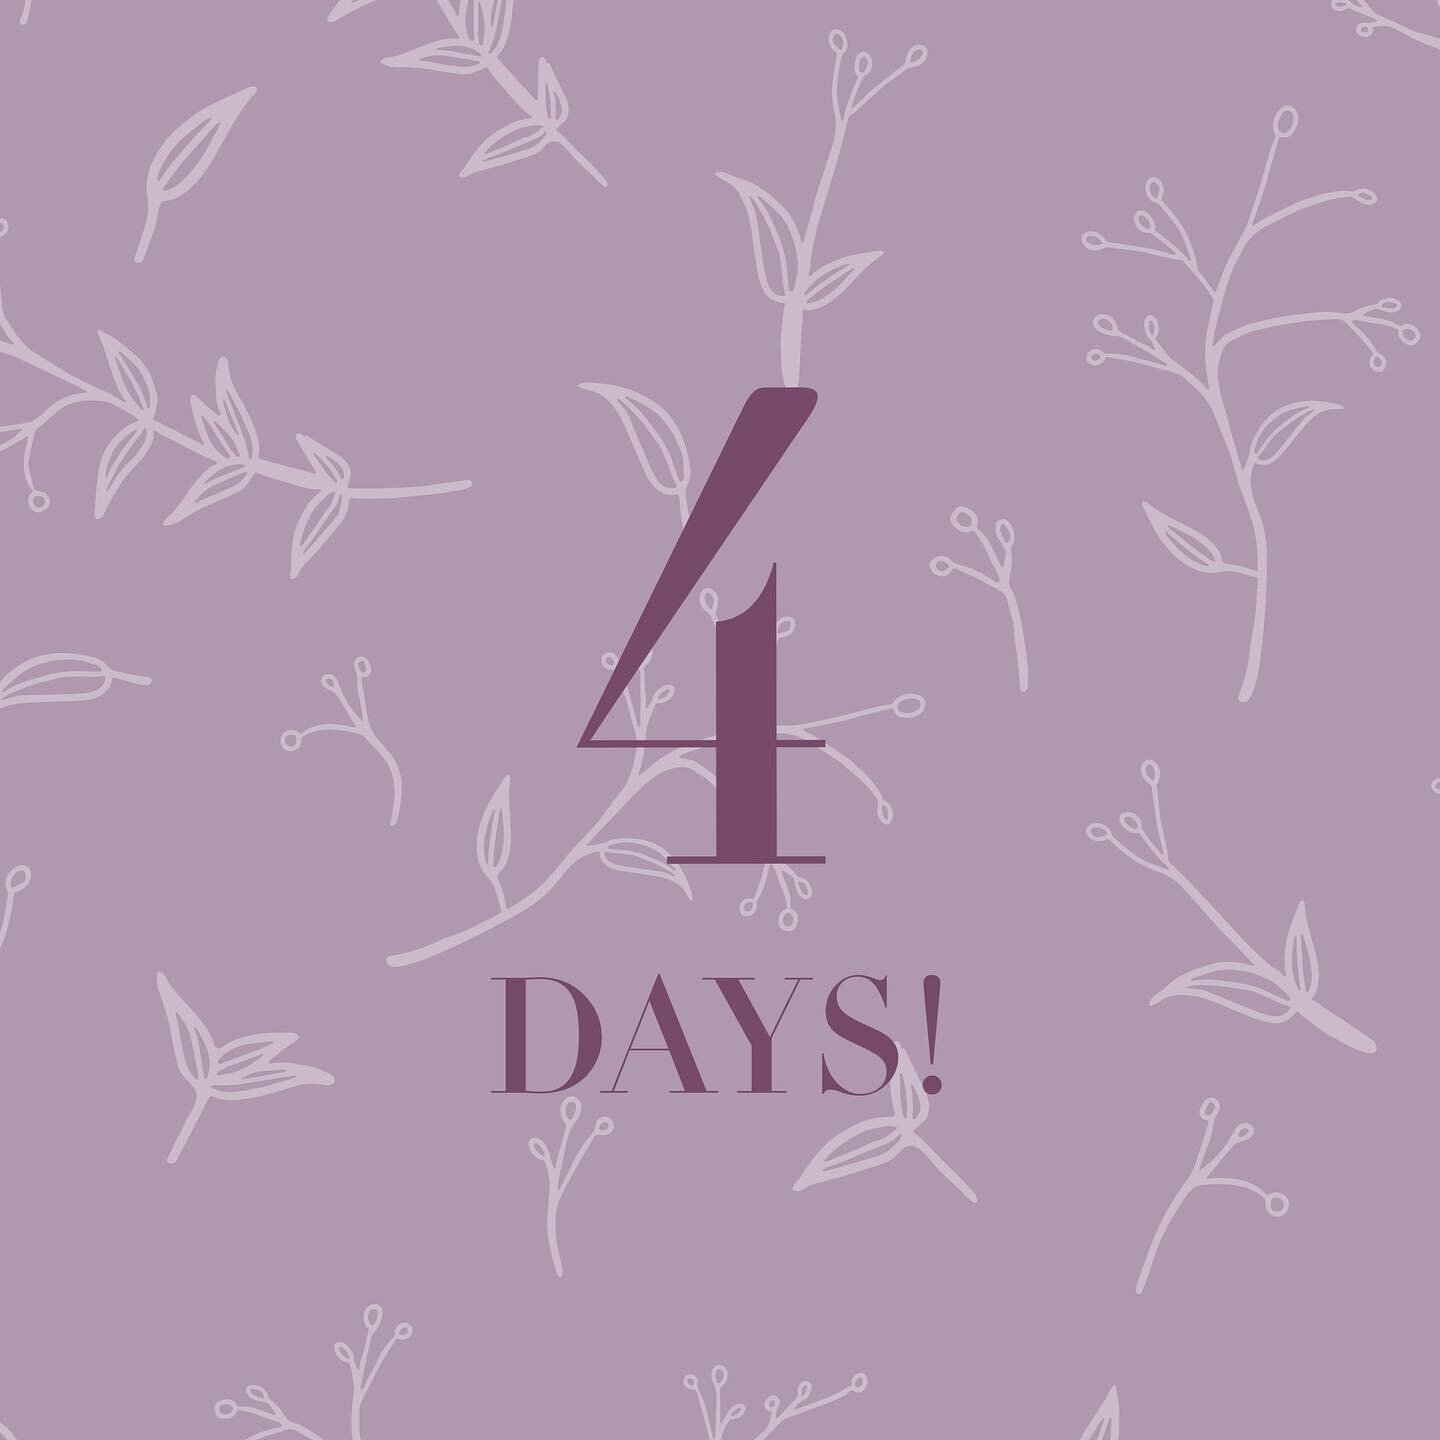 Four days left until my website launch!

www.imprintsandink.com will go live this Saturday. The&ldquo;Rare Treasures&rdquo; collection will be available to shop on the site and you will be able to find out all about the inspiration behind my designs.